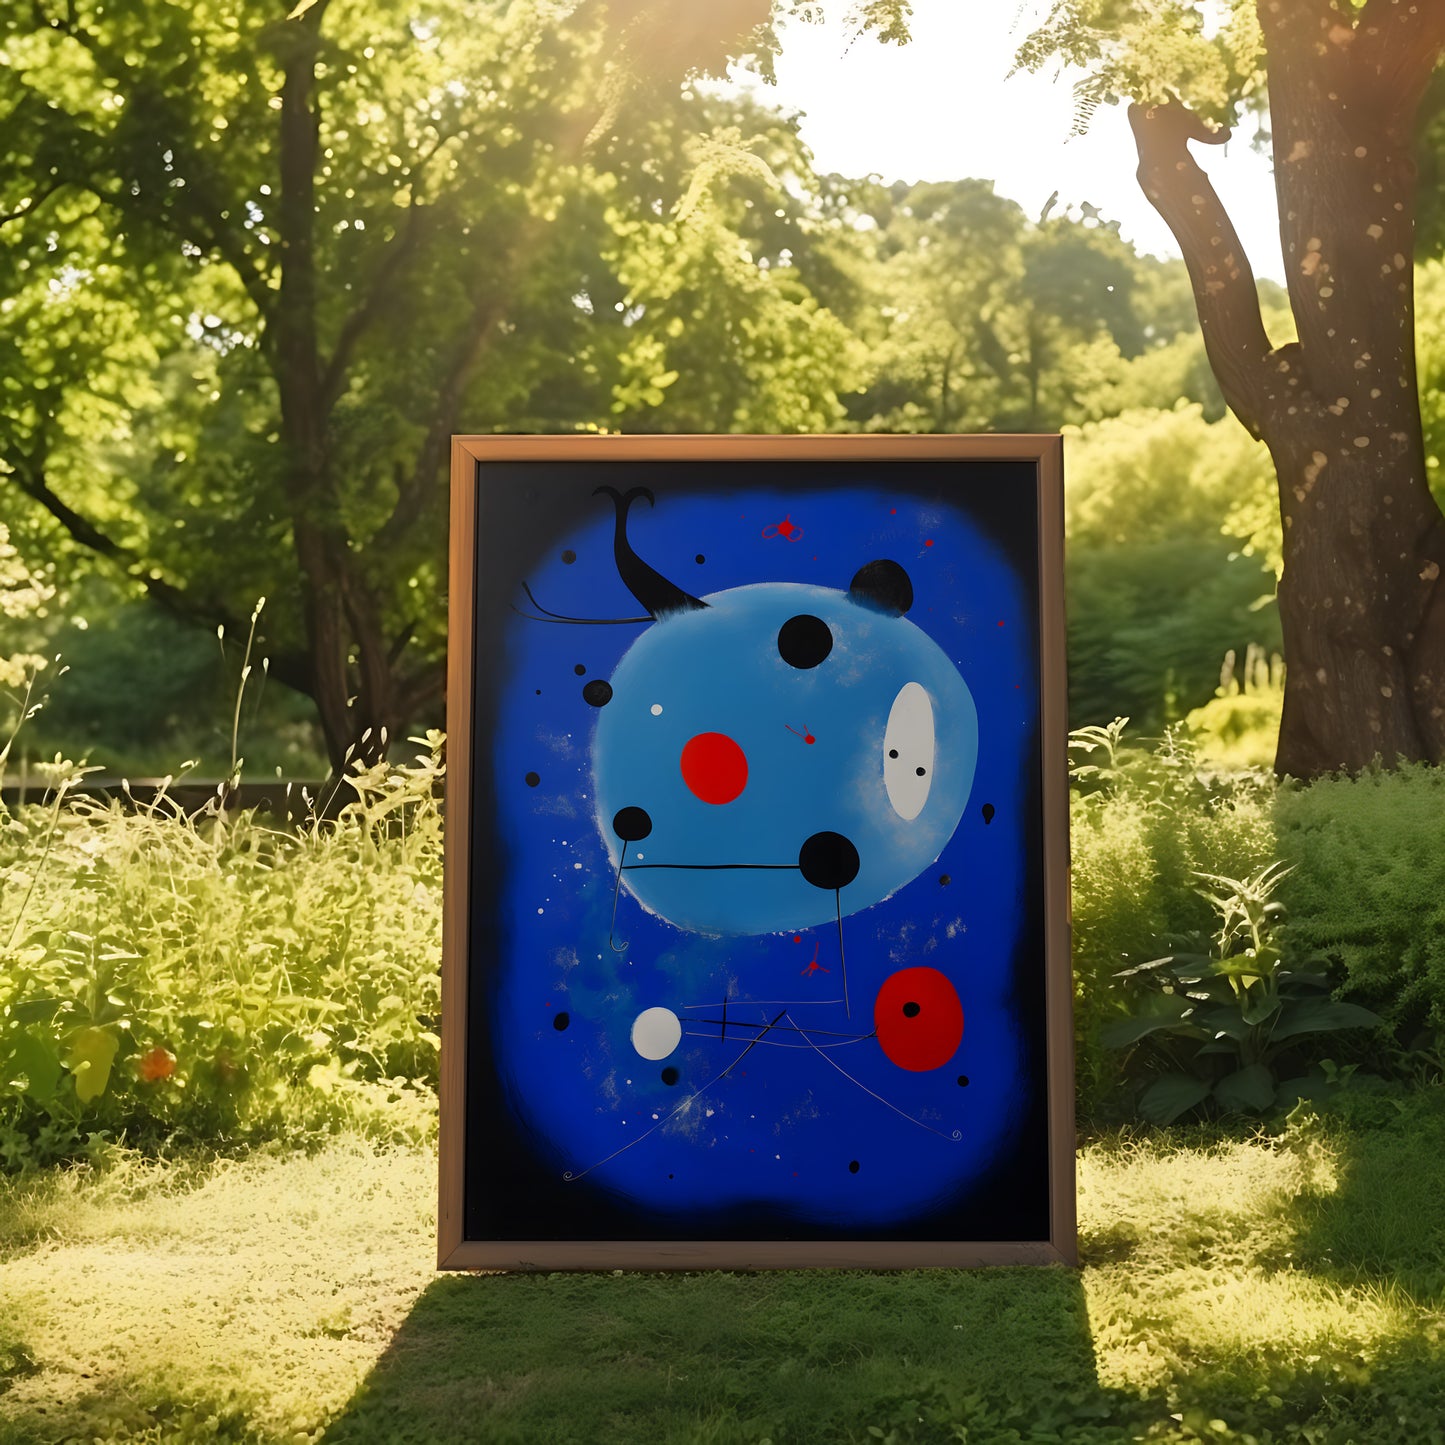 Abstract painting displayed on an easel in a sunny park setting.